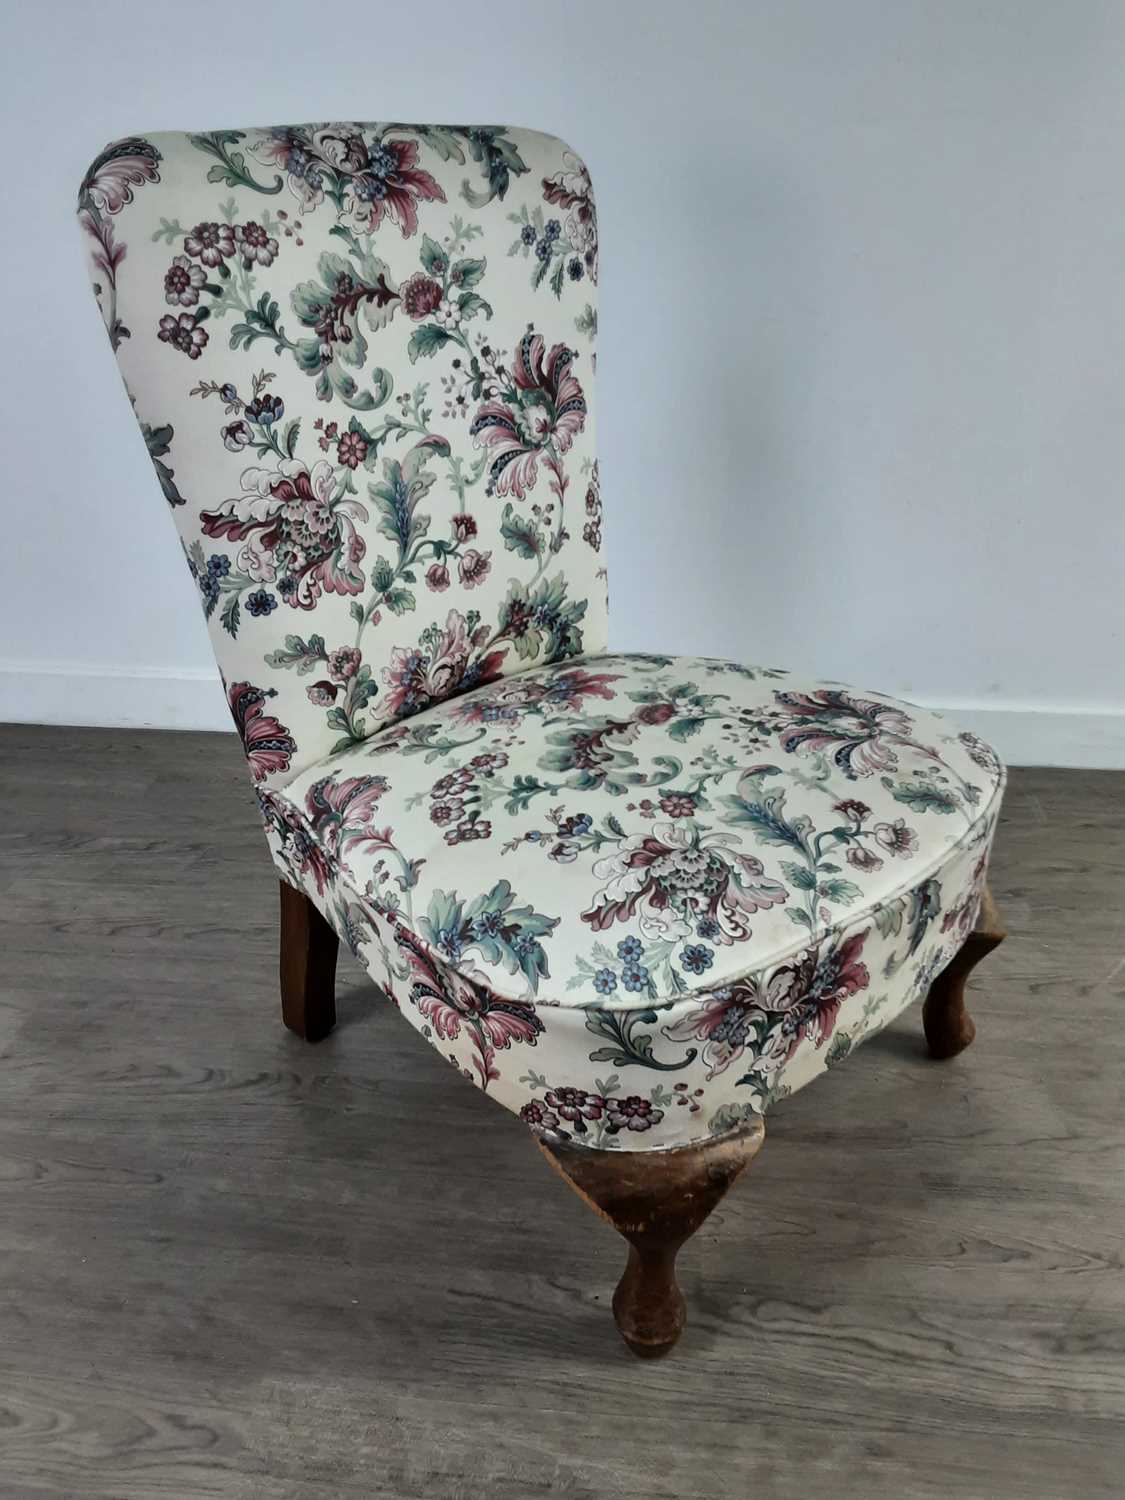 Lot 298 - A WALNUT UPHOLSTERED BEDROOM CHAIR